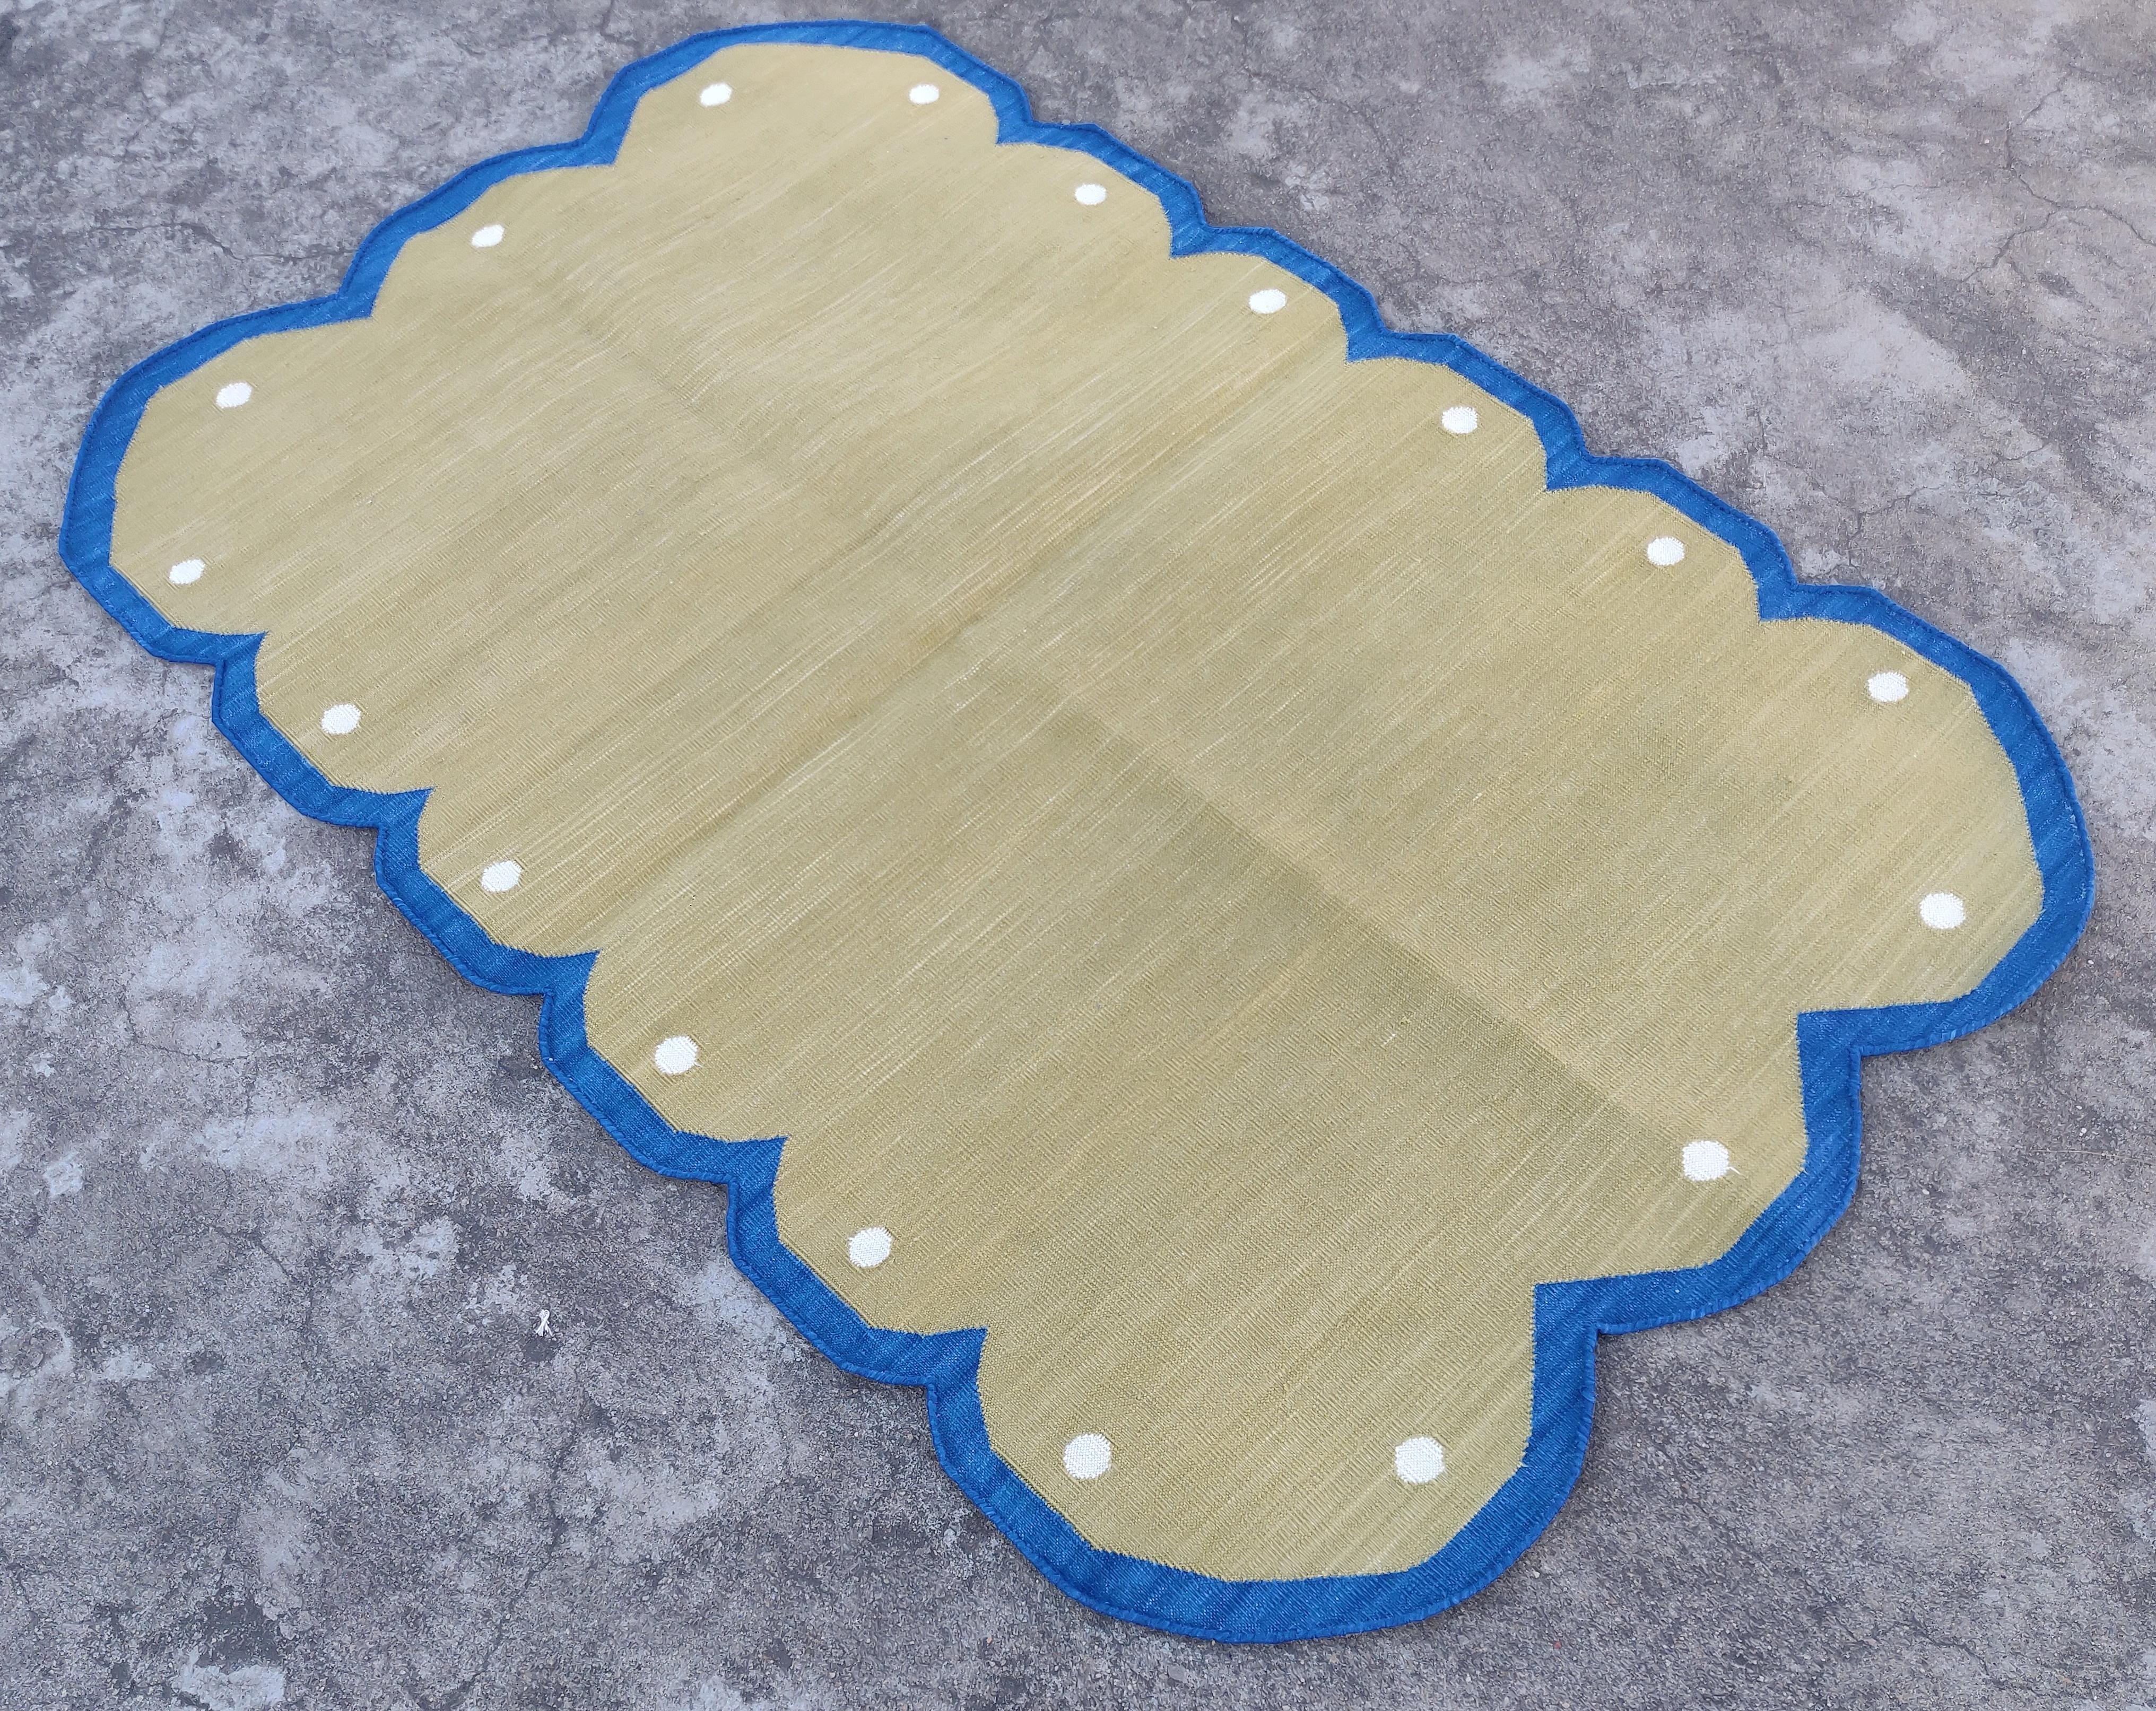 Cotton Vegetable Dyed Olive Green, Cream And Blue Scalloped Indian Dhurrie Rug-2.5'x4' (Scallops runs on all four sides)

These special flat-weave dhurries are hand-woven with 15 ply 100% cotton yarn. Due to the special manufacturing techniques used